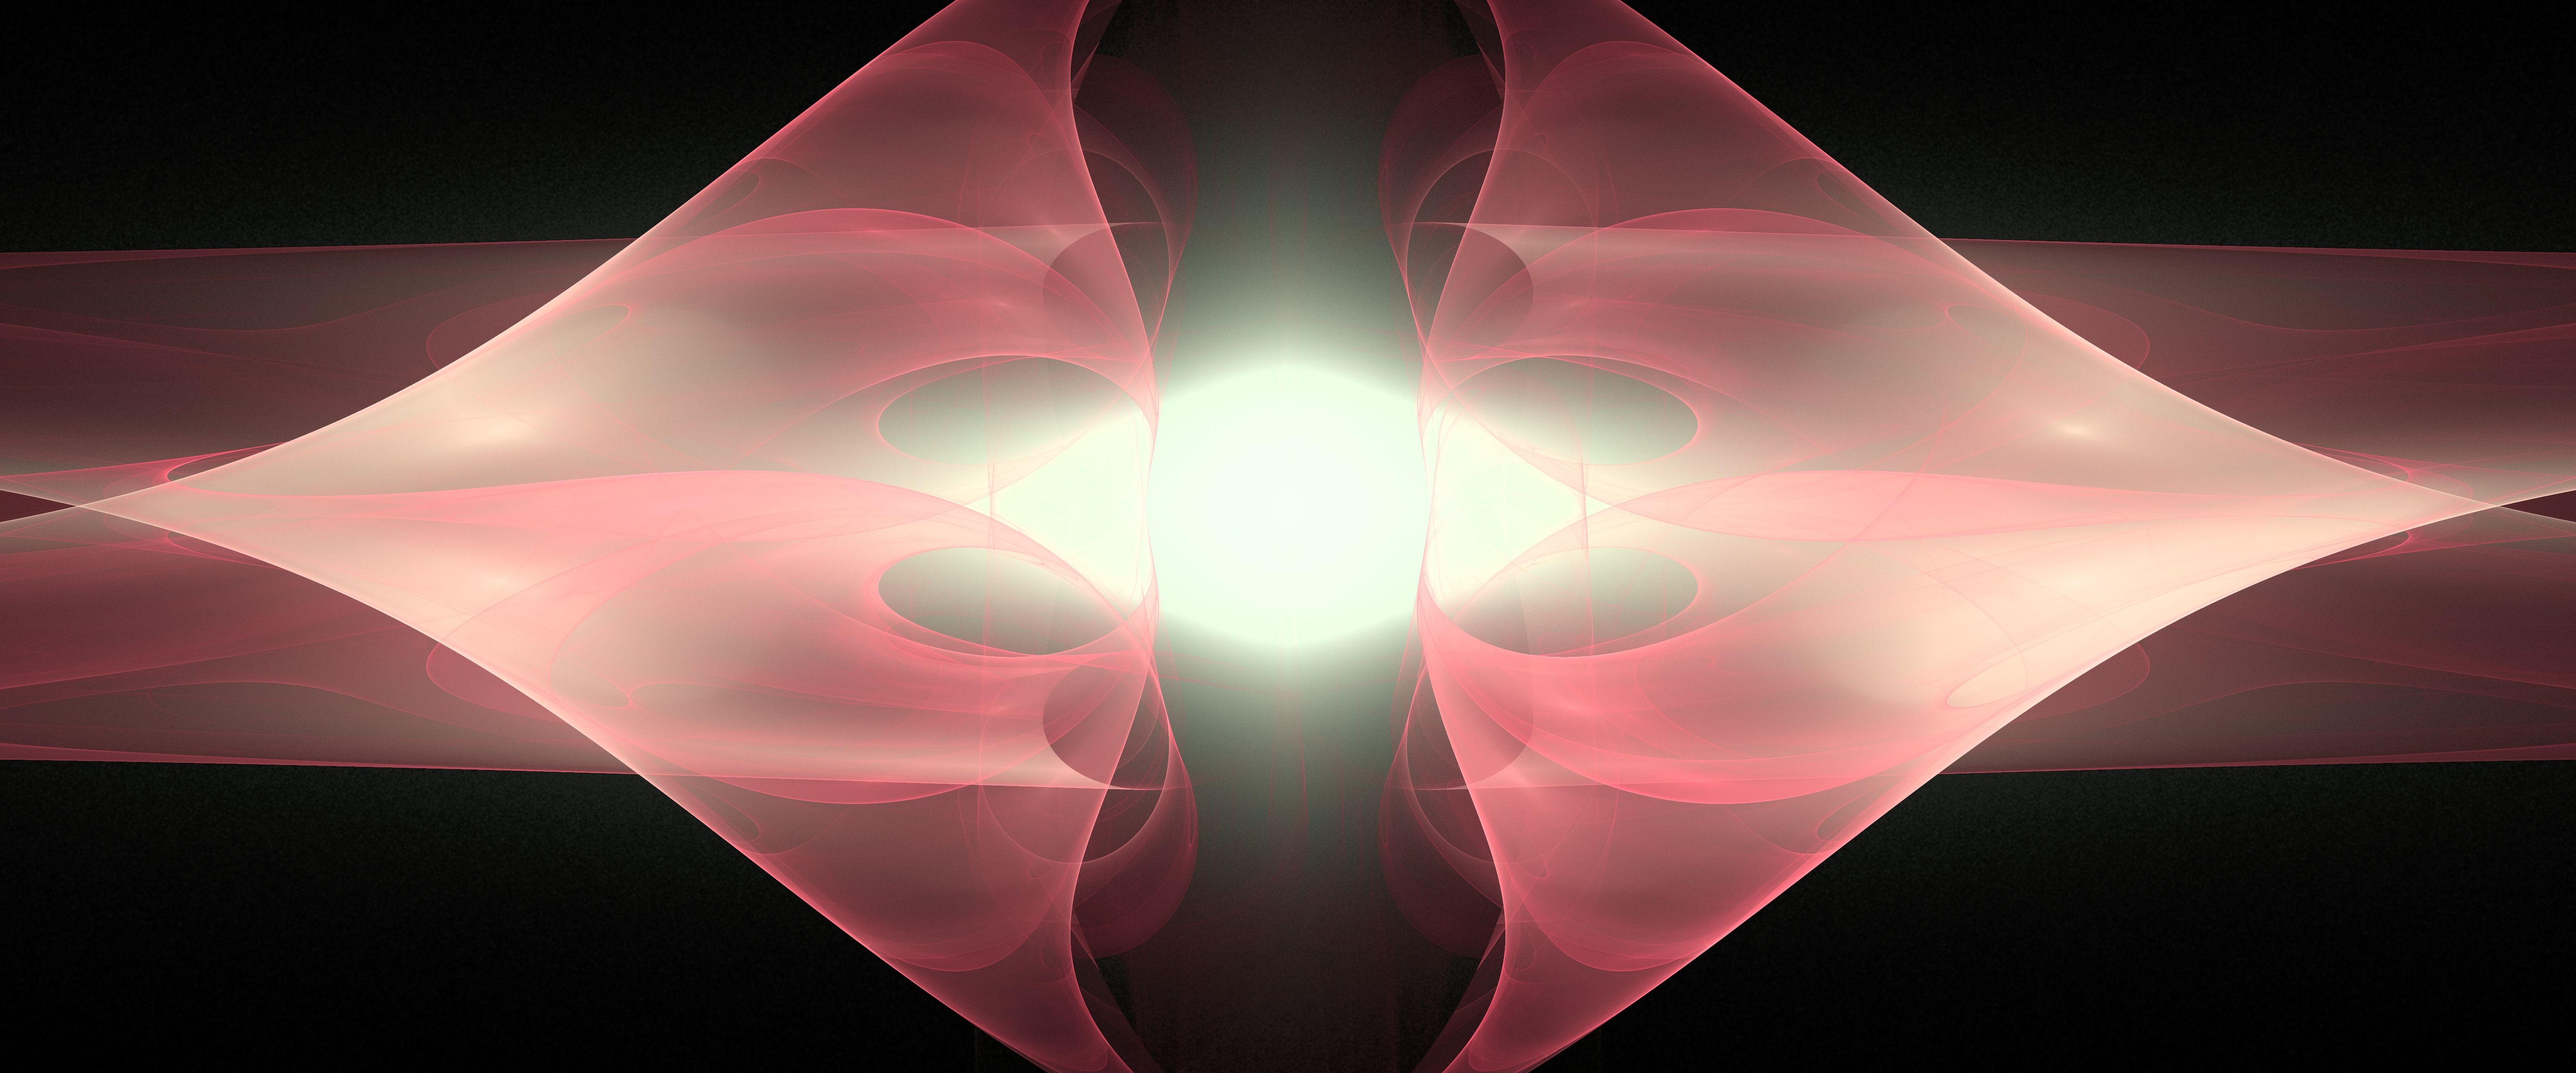 General 5760x2400 fractal fractal flame pattern symmetry bright abstract psychedelic wide screen digital art